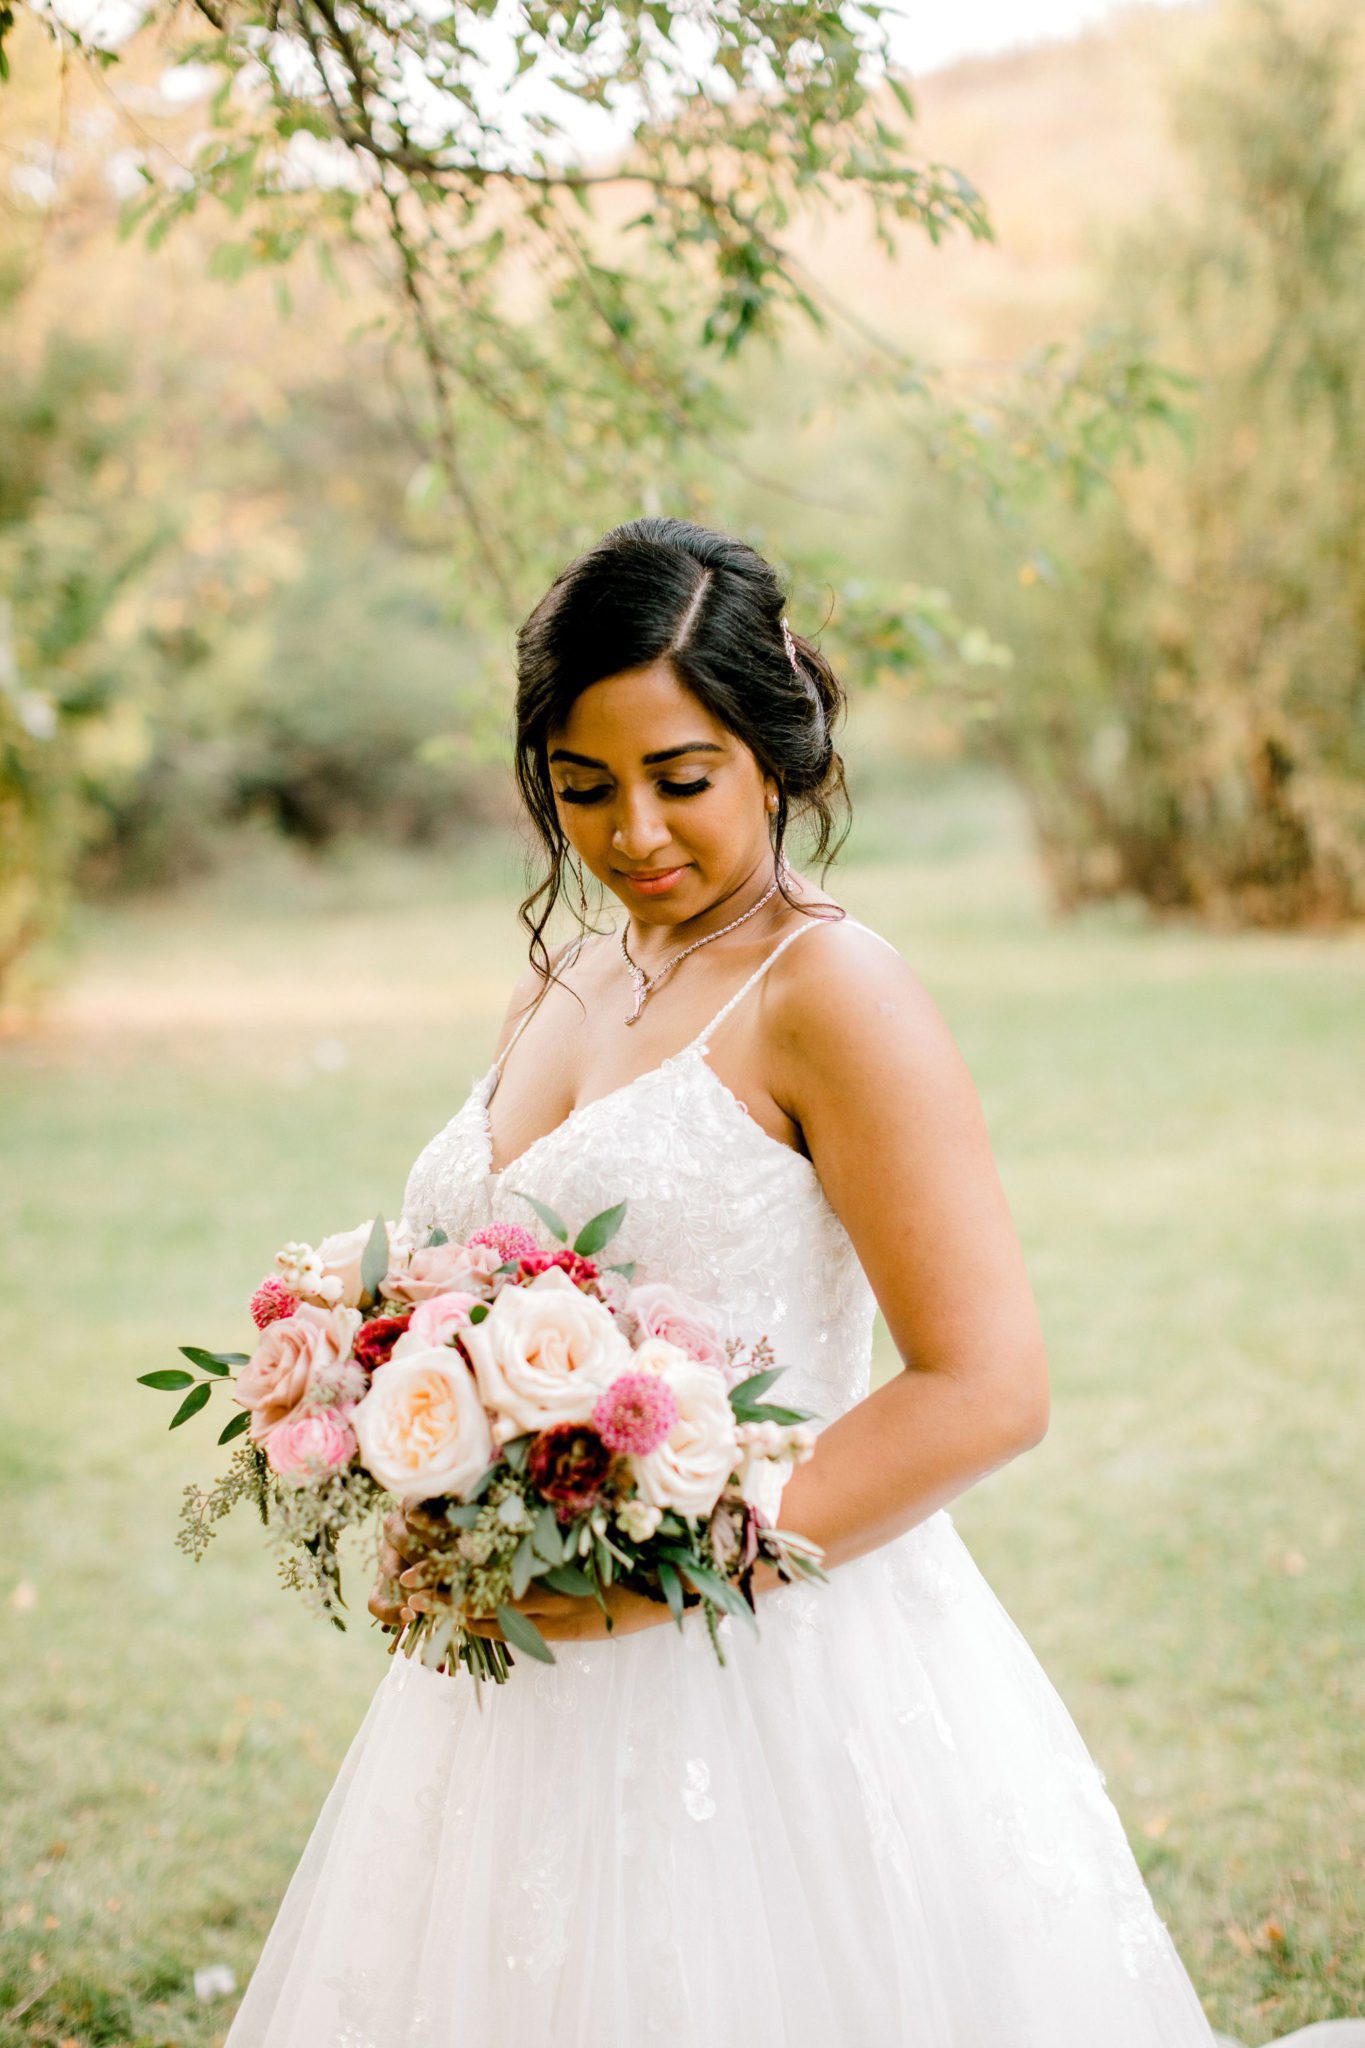 Stunning bride poses underneath romantic tree branches in a Calgary park